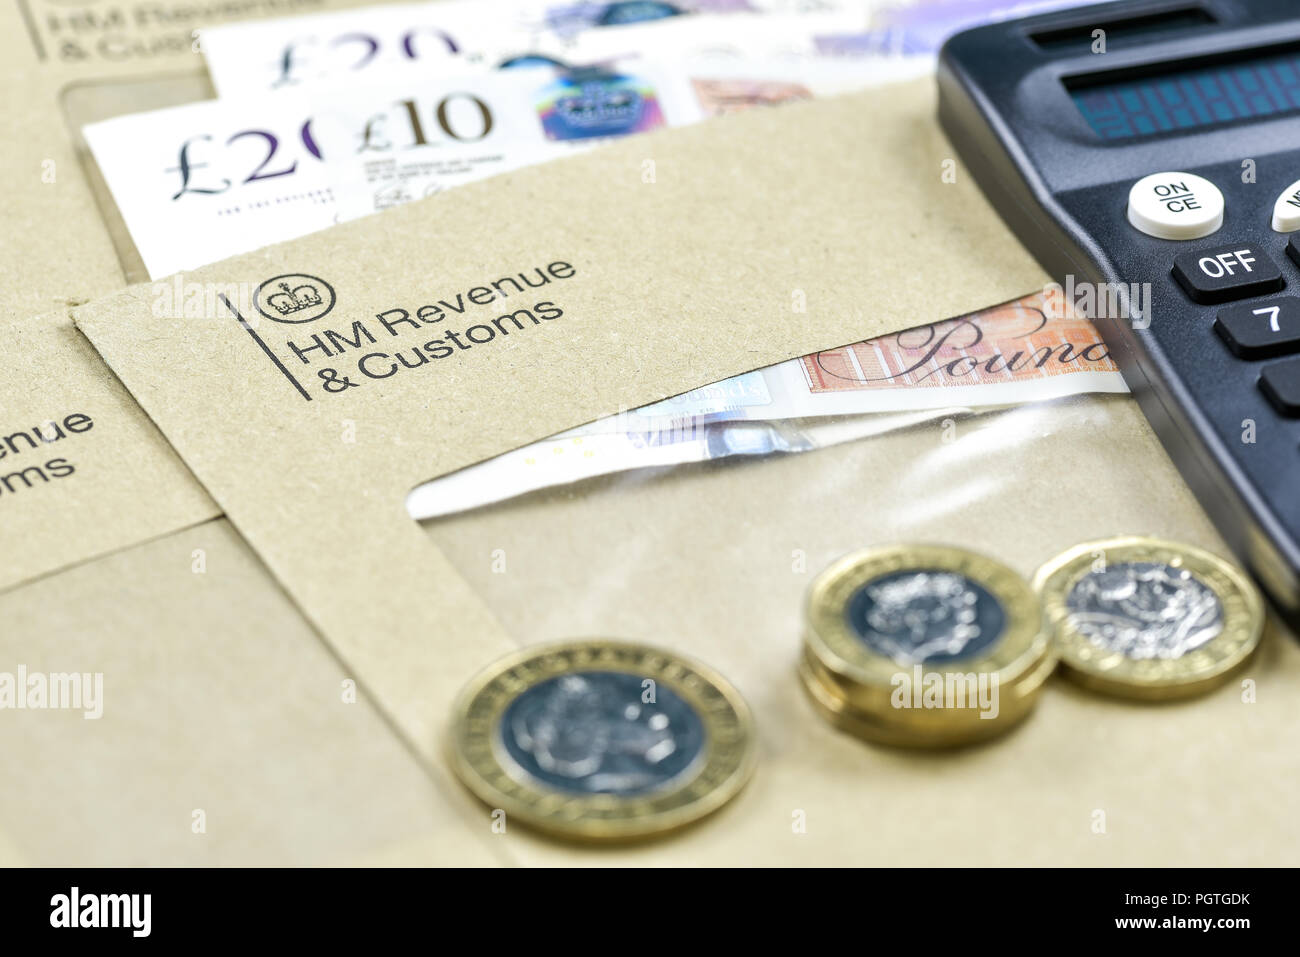 England, UK - August 16 2018: The logo of Her Majestys Revenue and Customs on envelope, with money or check included inside.  HMRC is a non-ministeria Stock Photo